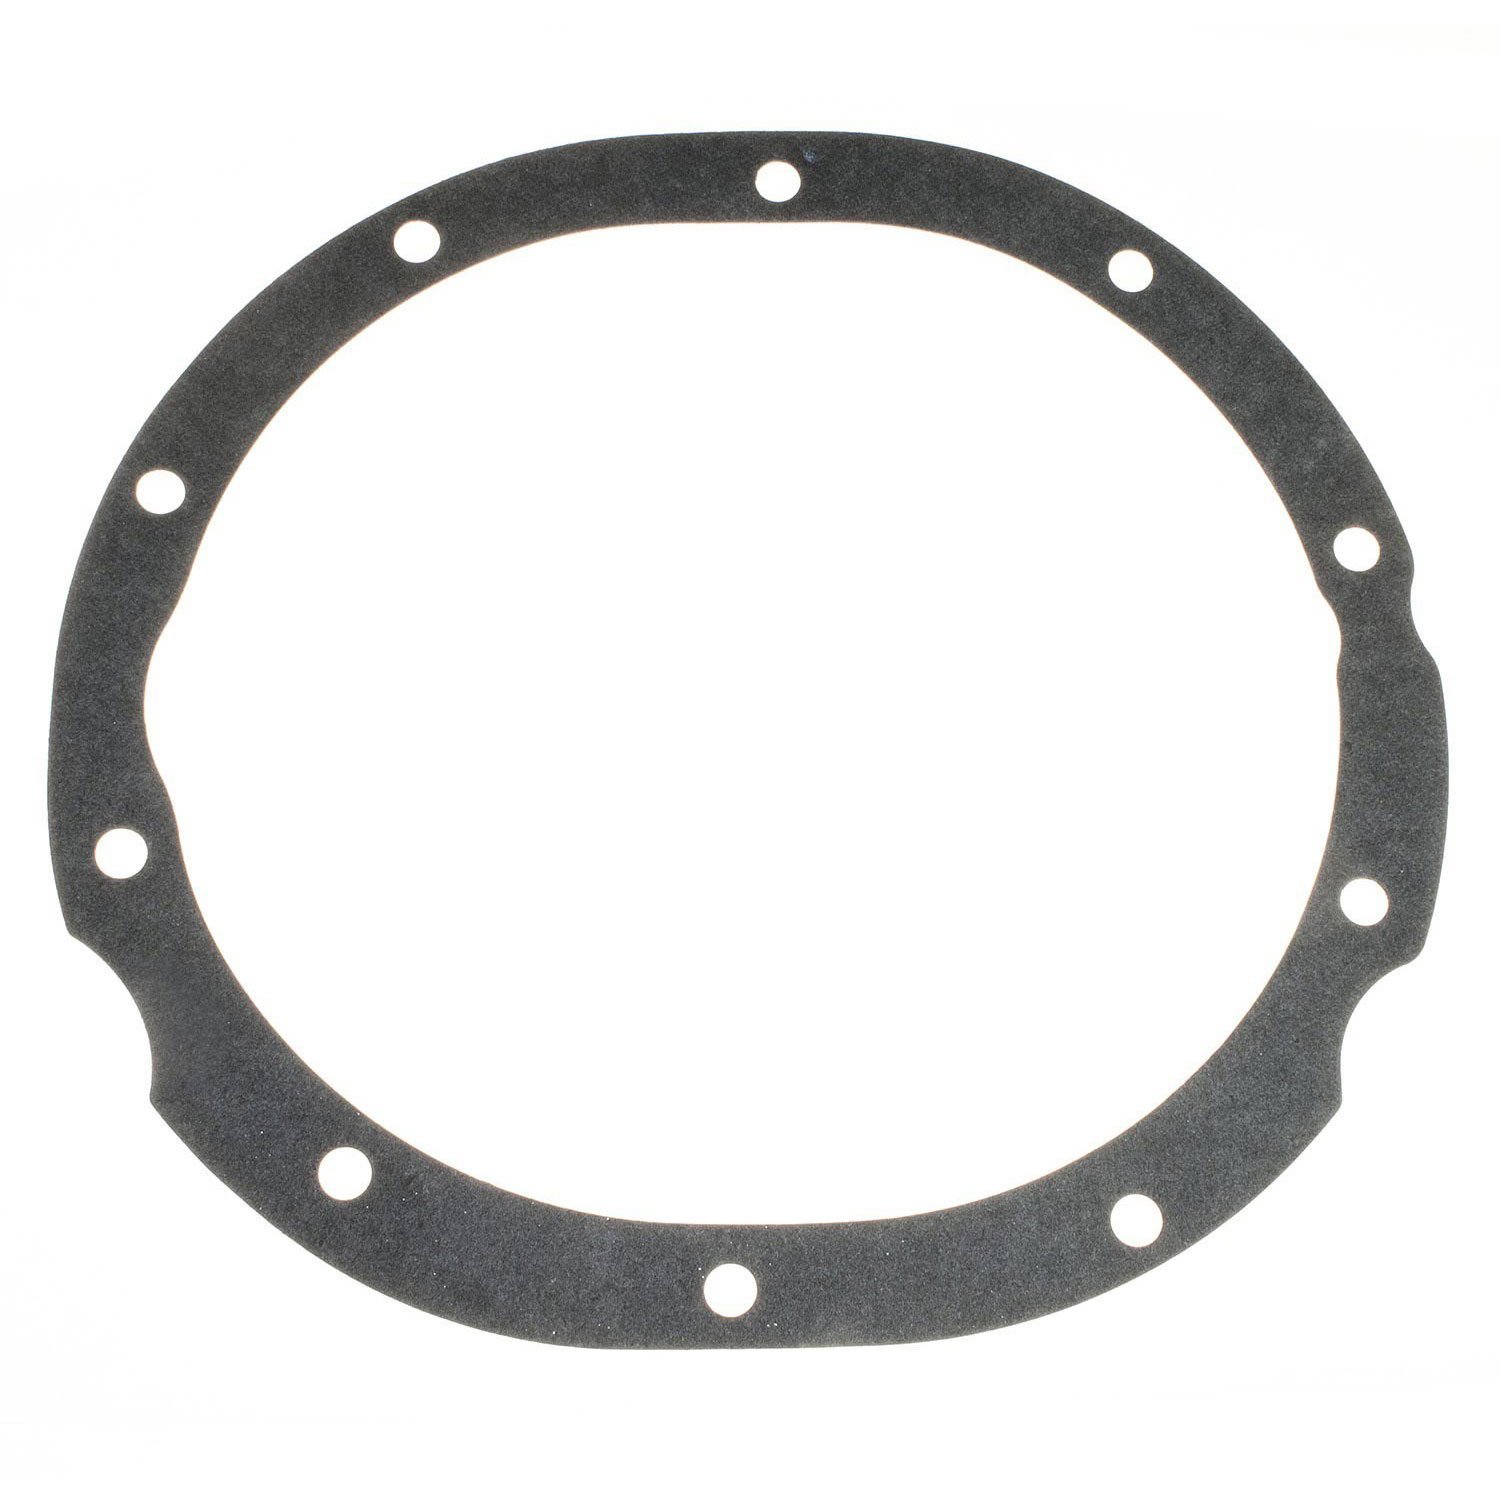 Differential Cover Gasket Ford 9"